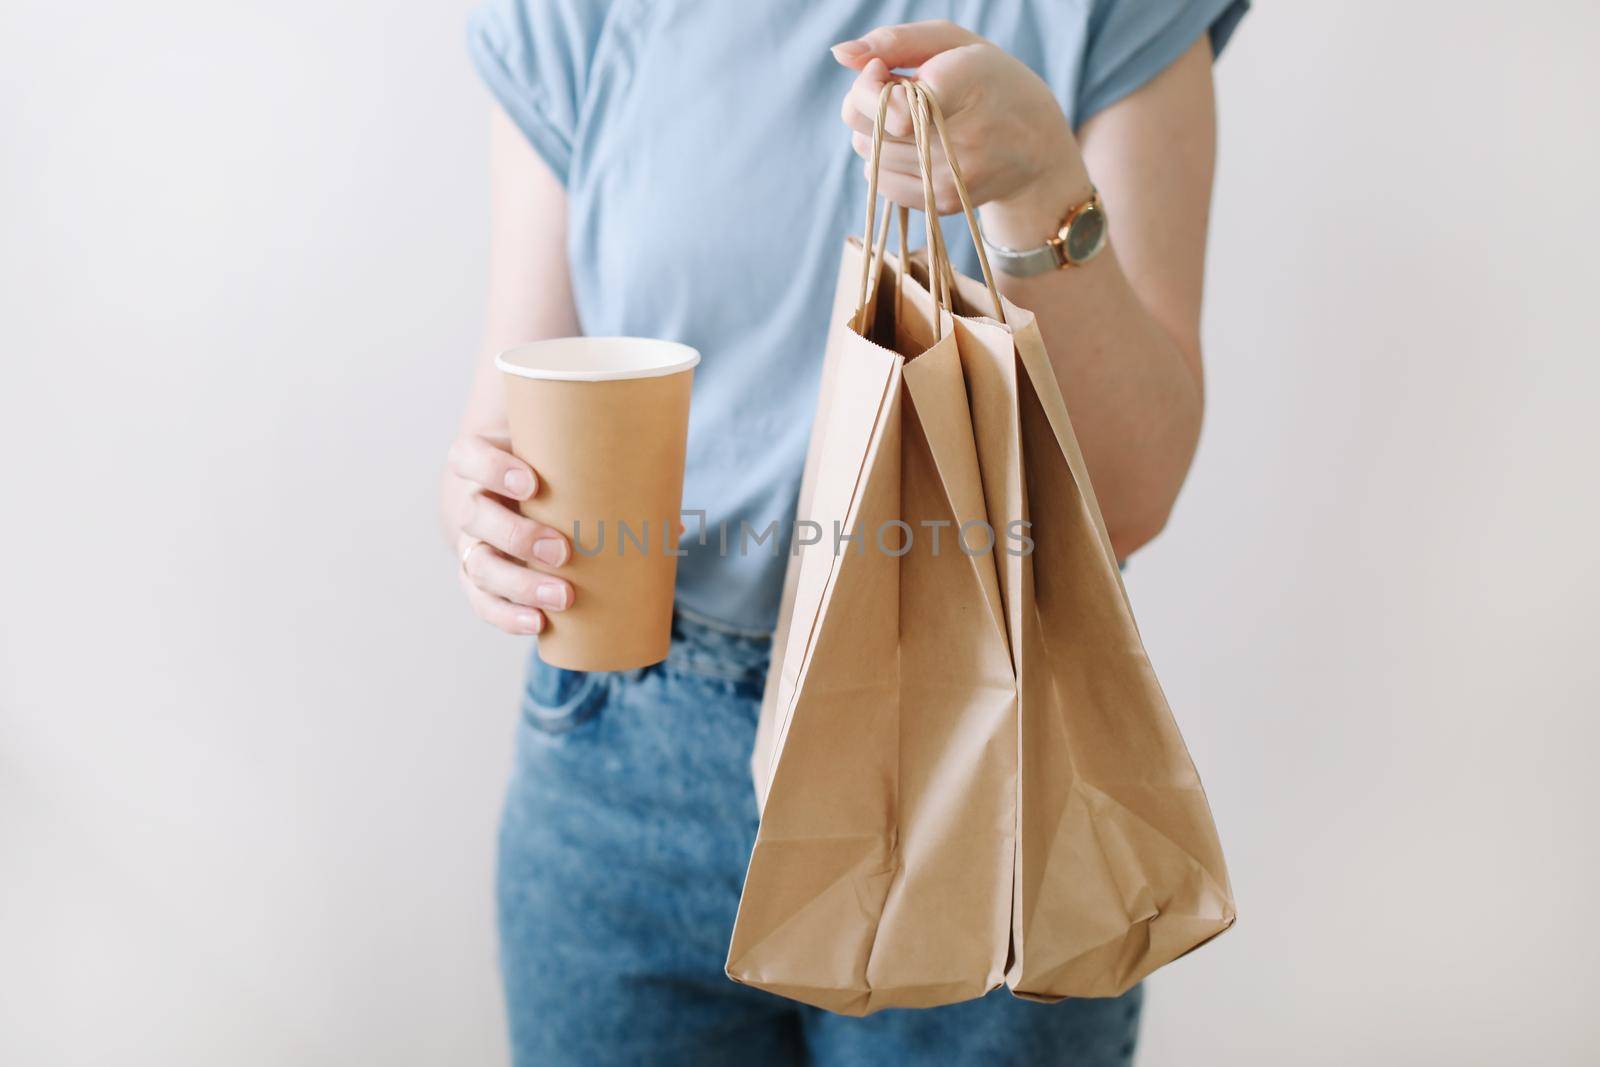 Delivery concept background. Woman hands holding craft paper bags on white, copy space, banner, close-up.